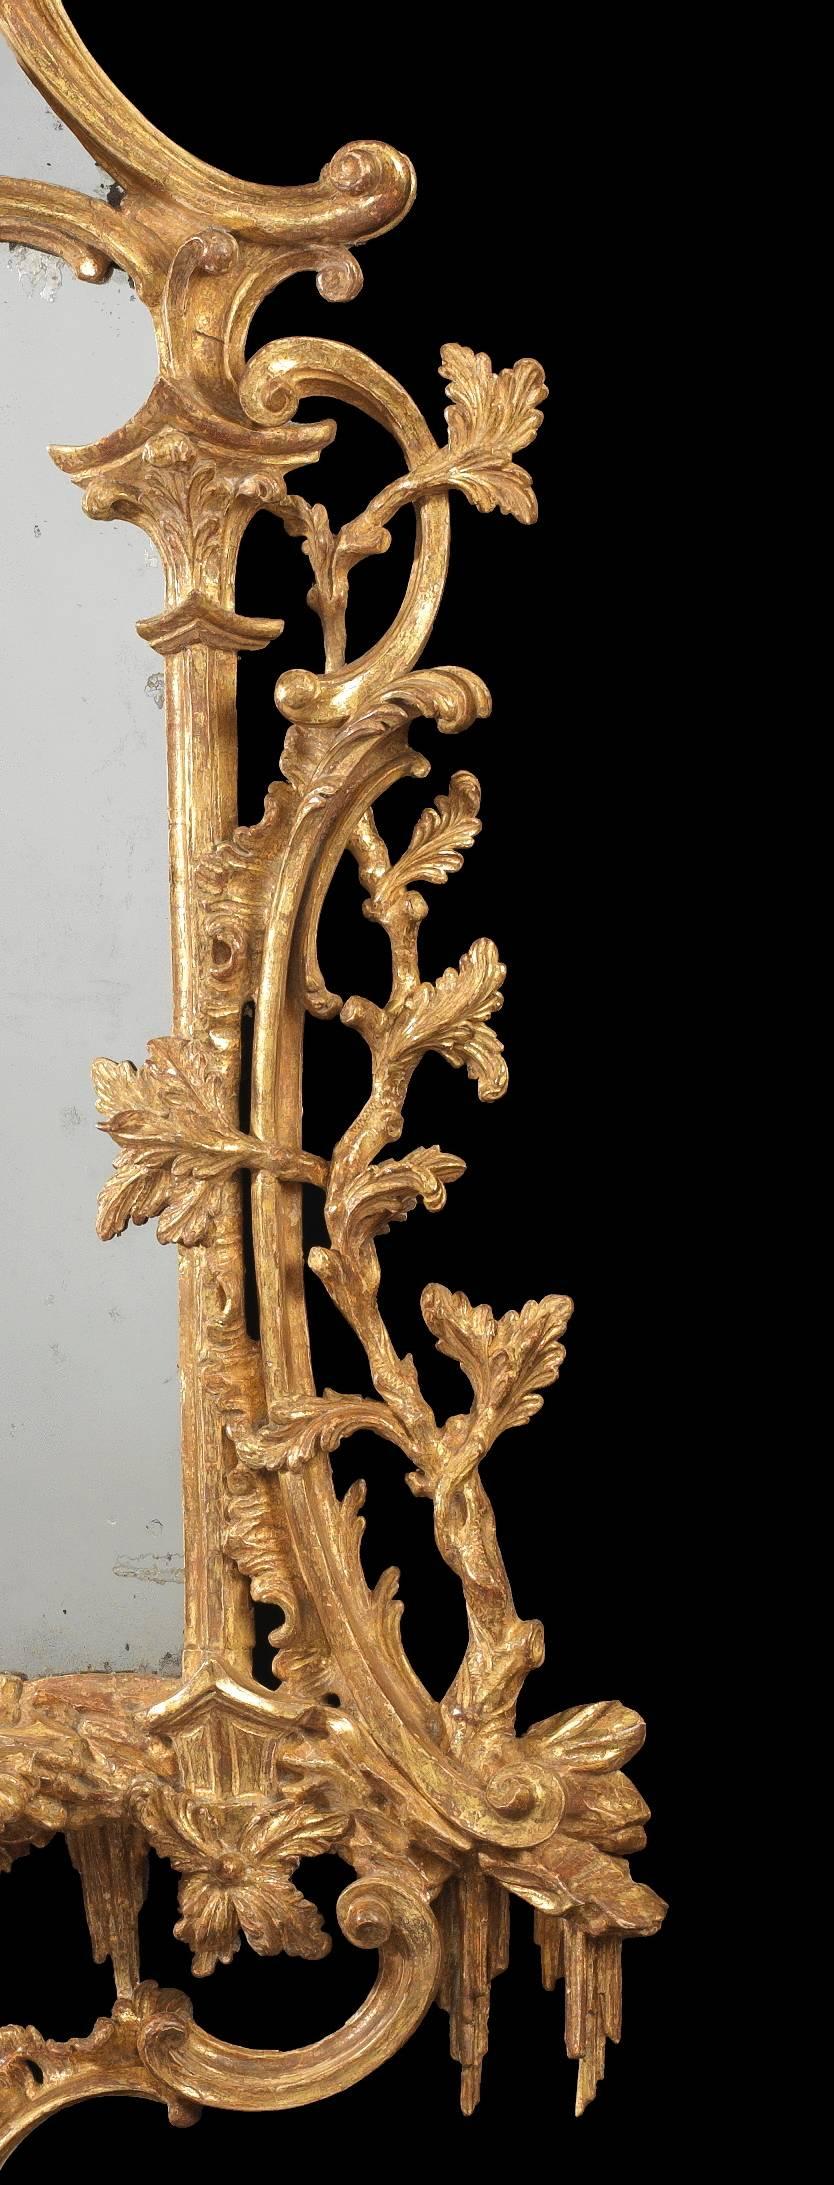 An exceptional George III giltwood girandole attributed to Thomas Chippendale. This girandole is characteristic of the exuberance of English Rococo design found in the work of Thomas Chippendale and Thomas Johnson; a ho-ho bird with outstretched